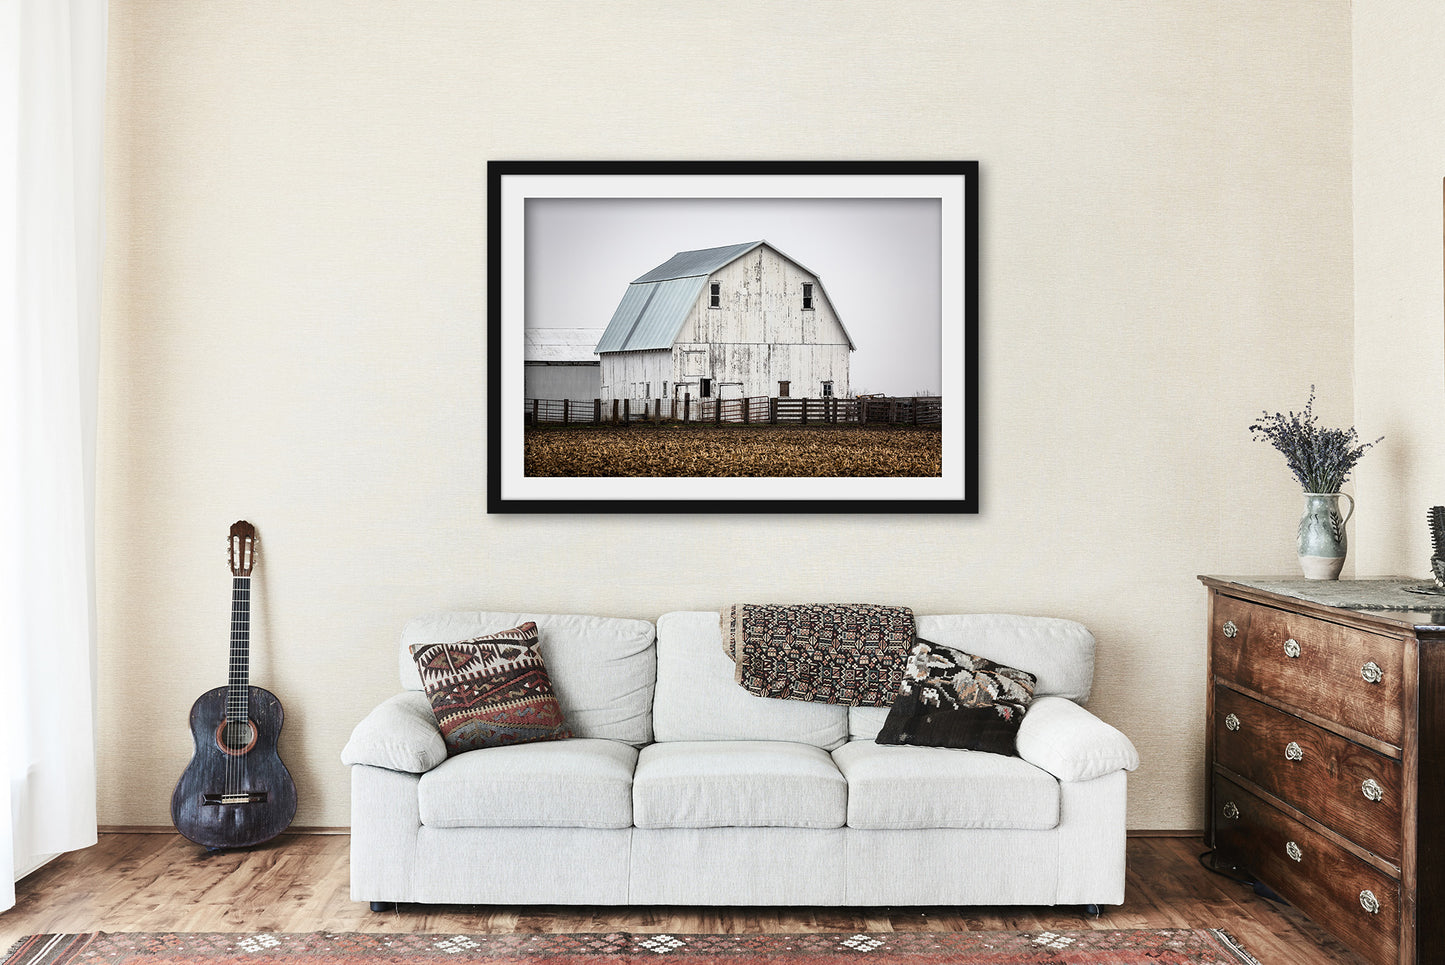 Framed and Matted Print - Rustic White Barn on Foggy Spring Morning on Illinois Farm - Ready to Hang Country Farmhouse Wall Art Decor